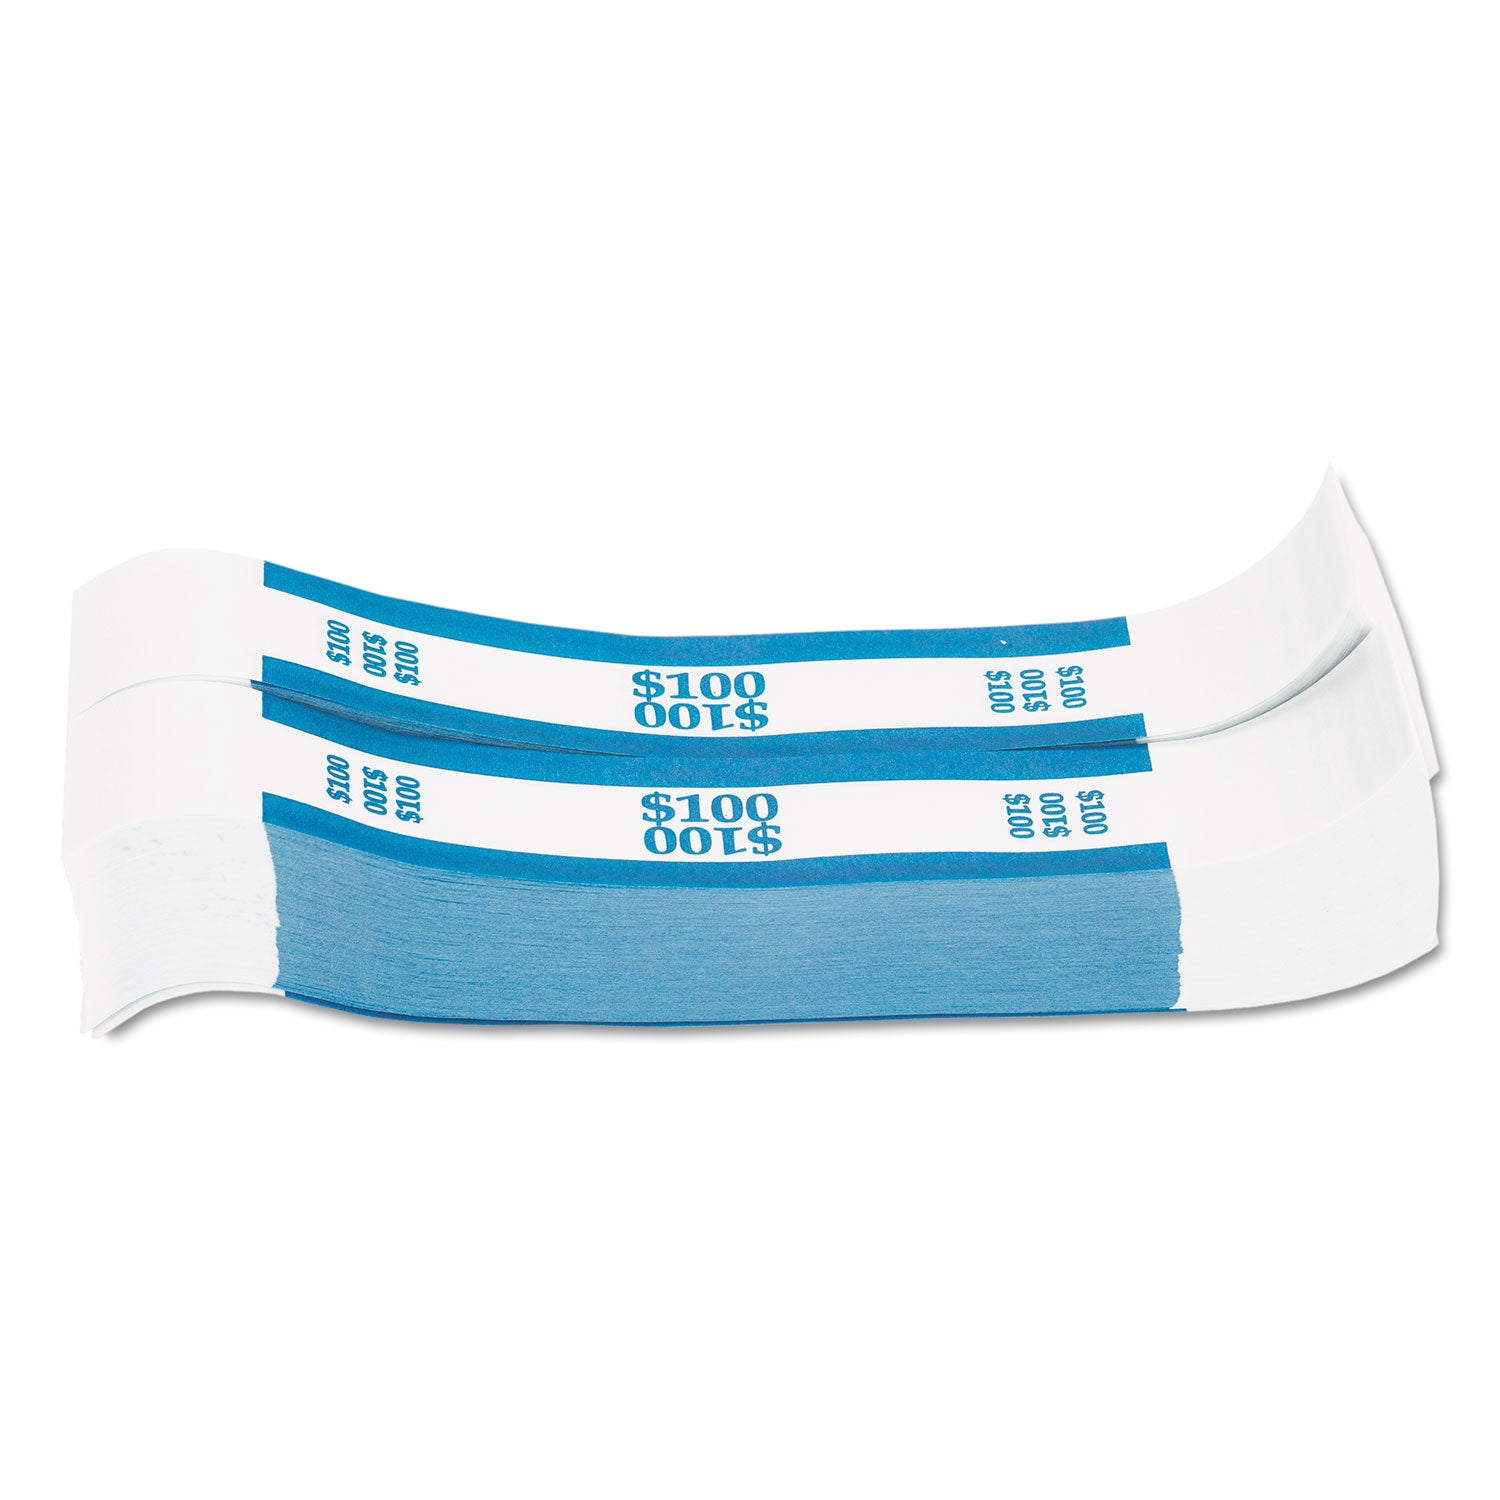 Currency Straps, Blue, $100 in Dollar Bills, 1000 Bands/Pack - 